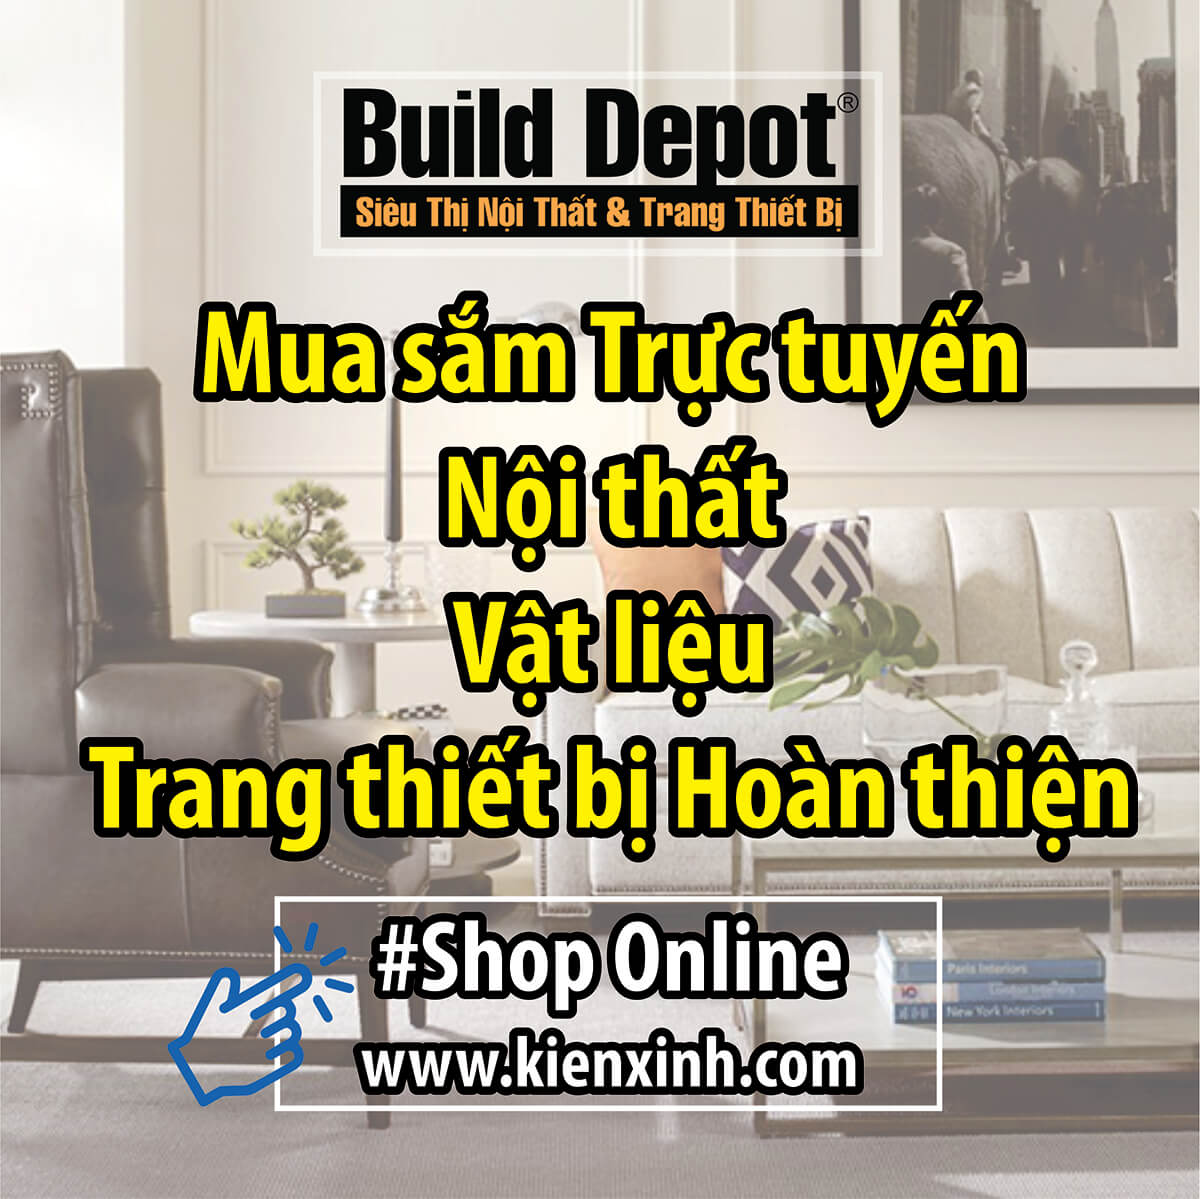 Shopping Online with Build Depot